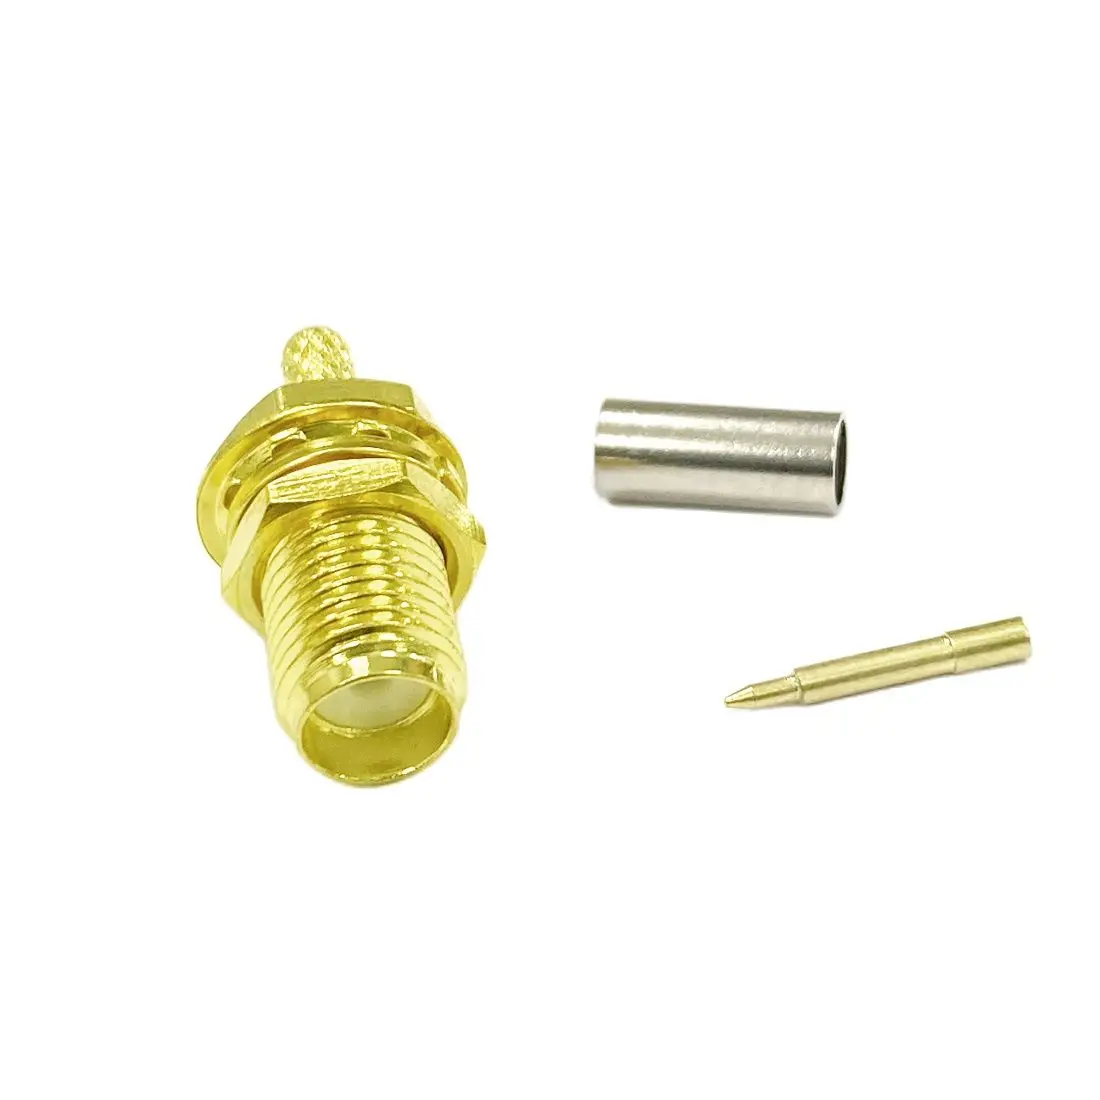 New 1- 10PCS SMA  Male Plug Female Jack /RP RF Coax Connector Crimp For LMR100 RG174 RG316 Cable Straight Goldplated Adapter images - 6